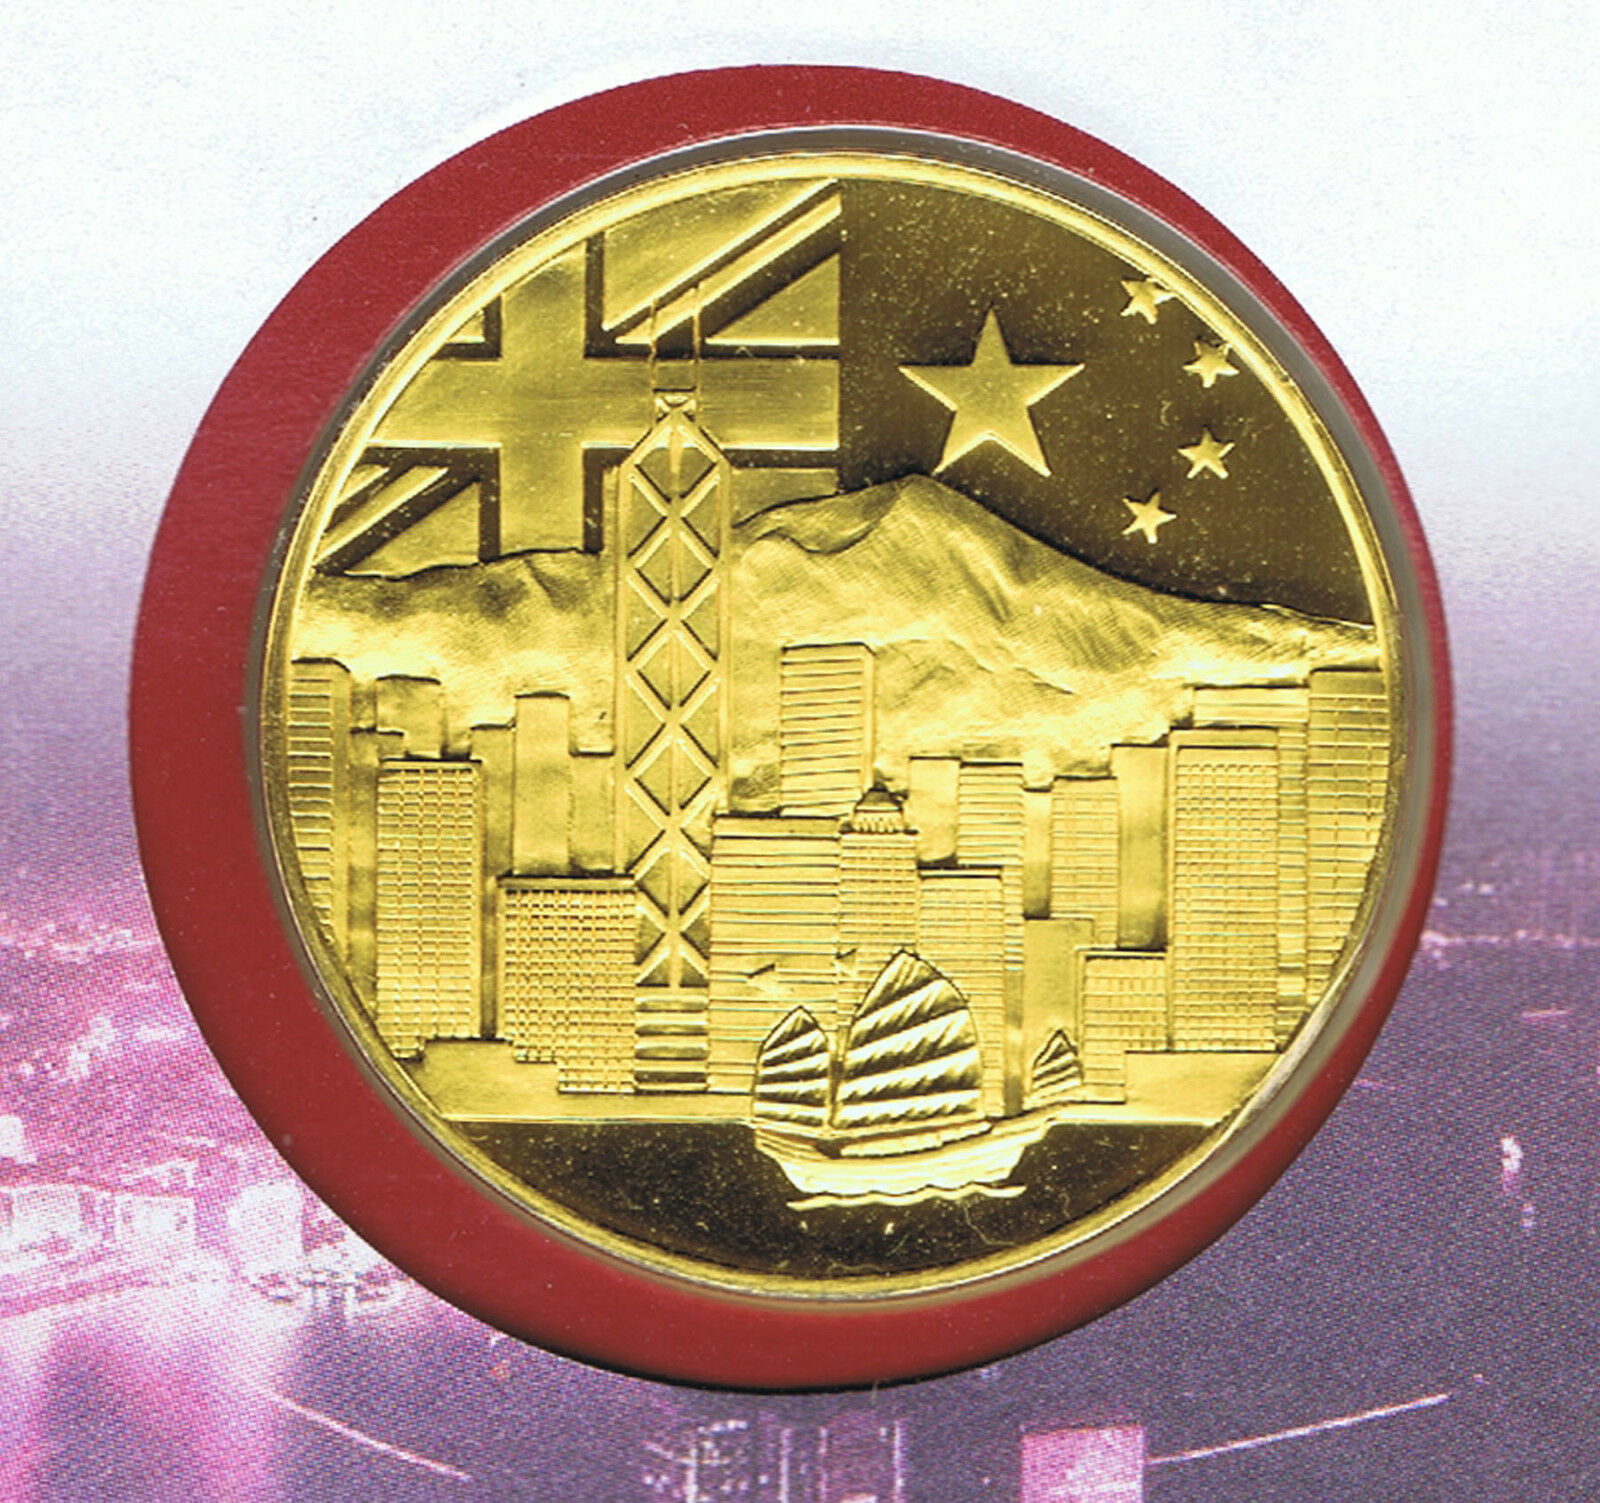 HONG KONG RETURNS to CHINA COMMEMORATIVE MEDAL in STAMPED COVER DATED JUNE 1997